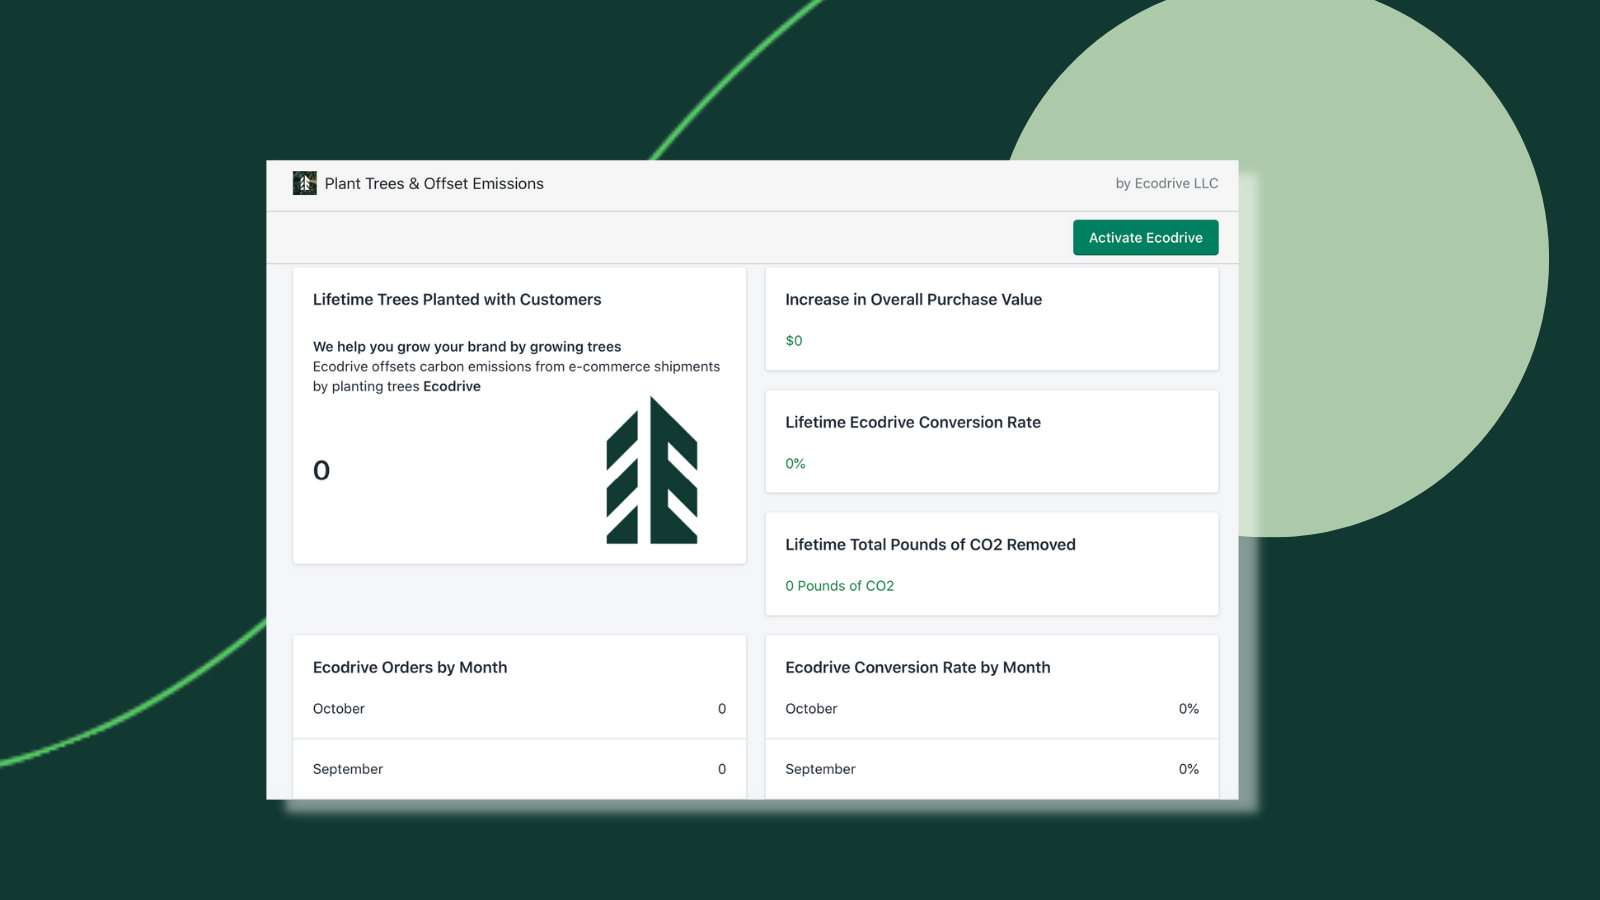 Easily track performance & tree planting to share with customers